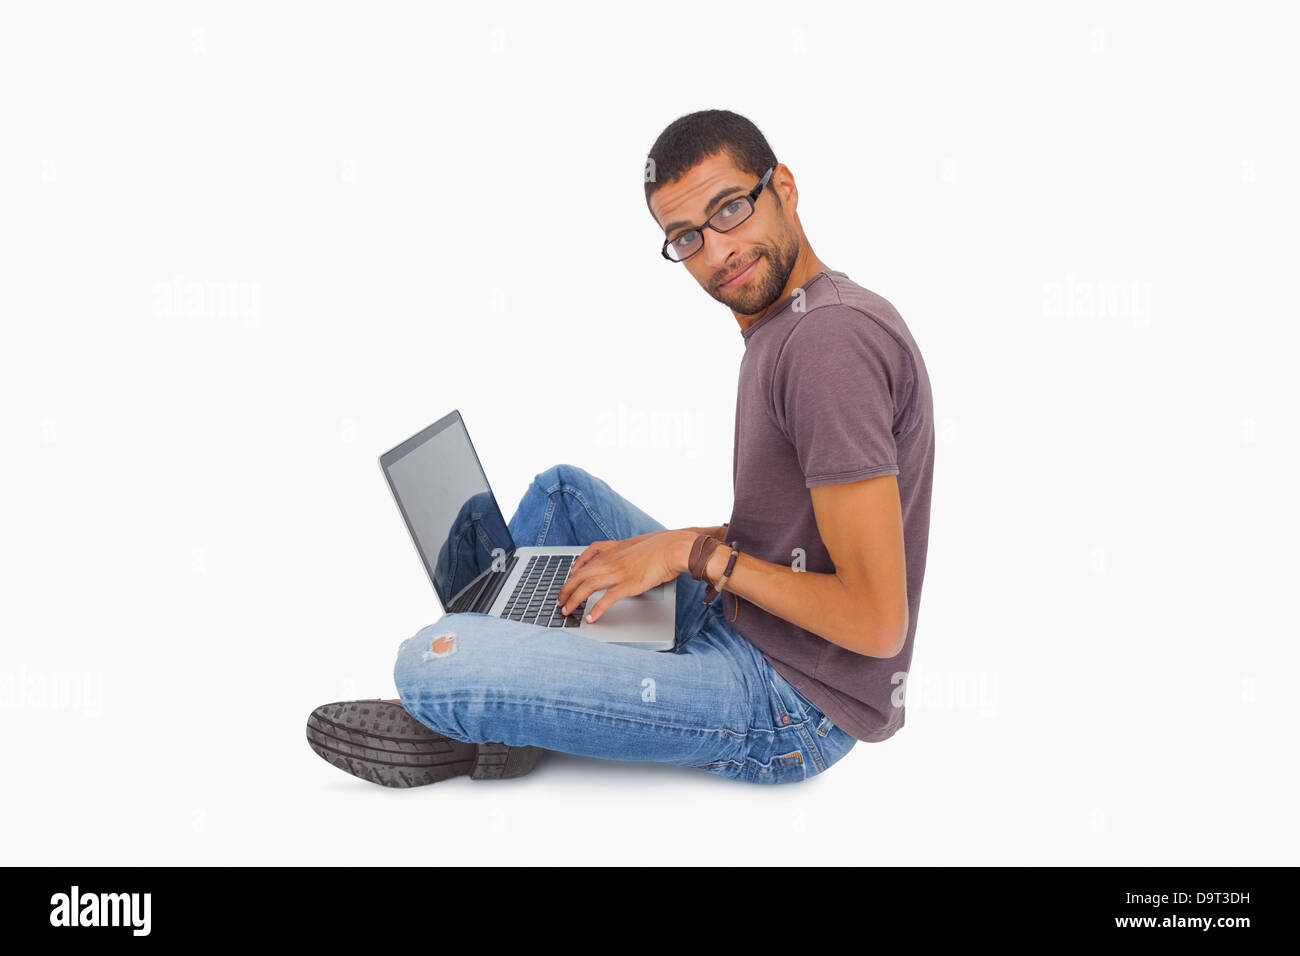 Man wearing glasses sitting on floor using laptop and looking at camera Stock Photo